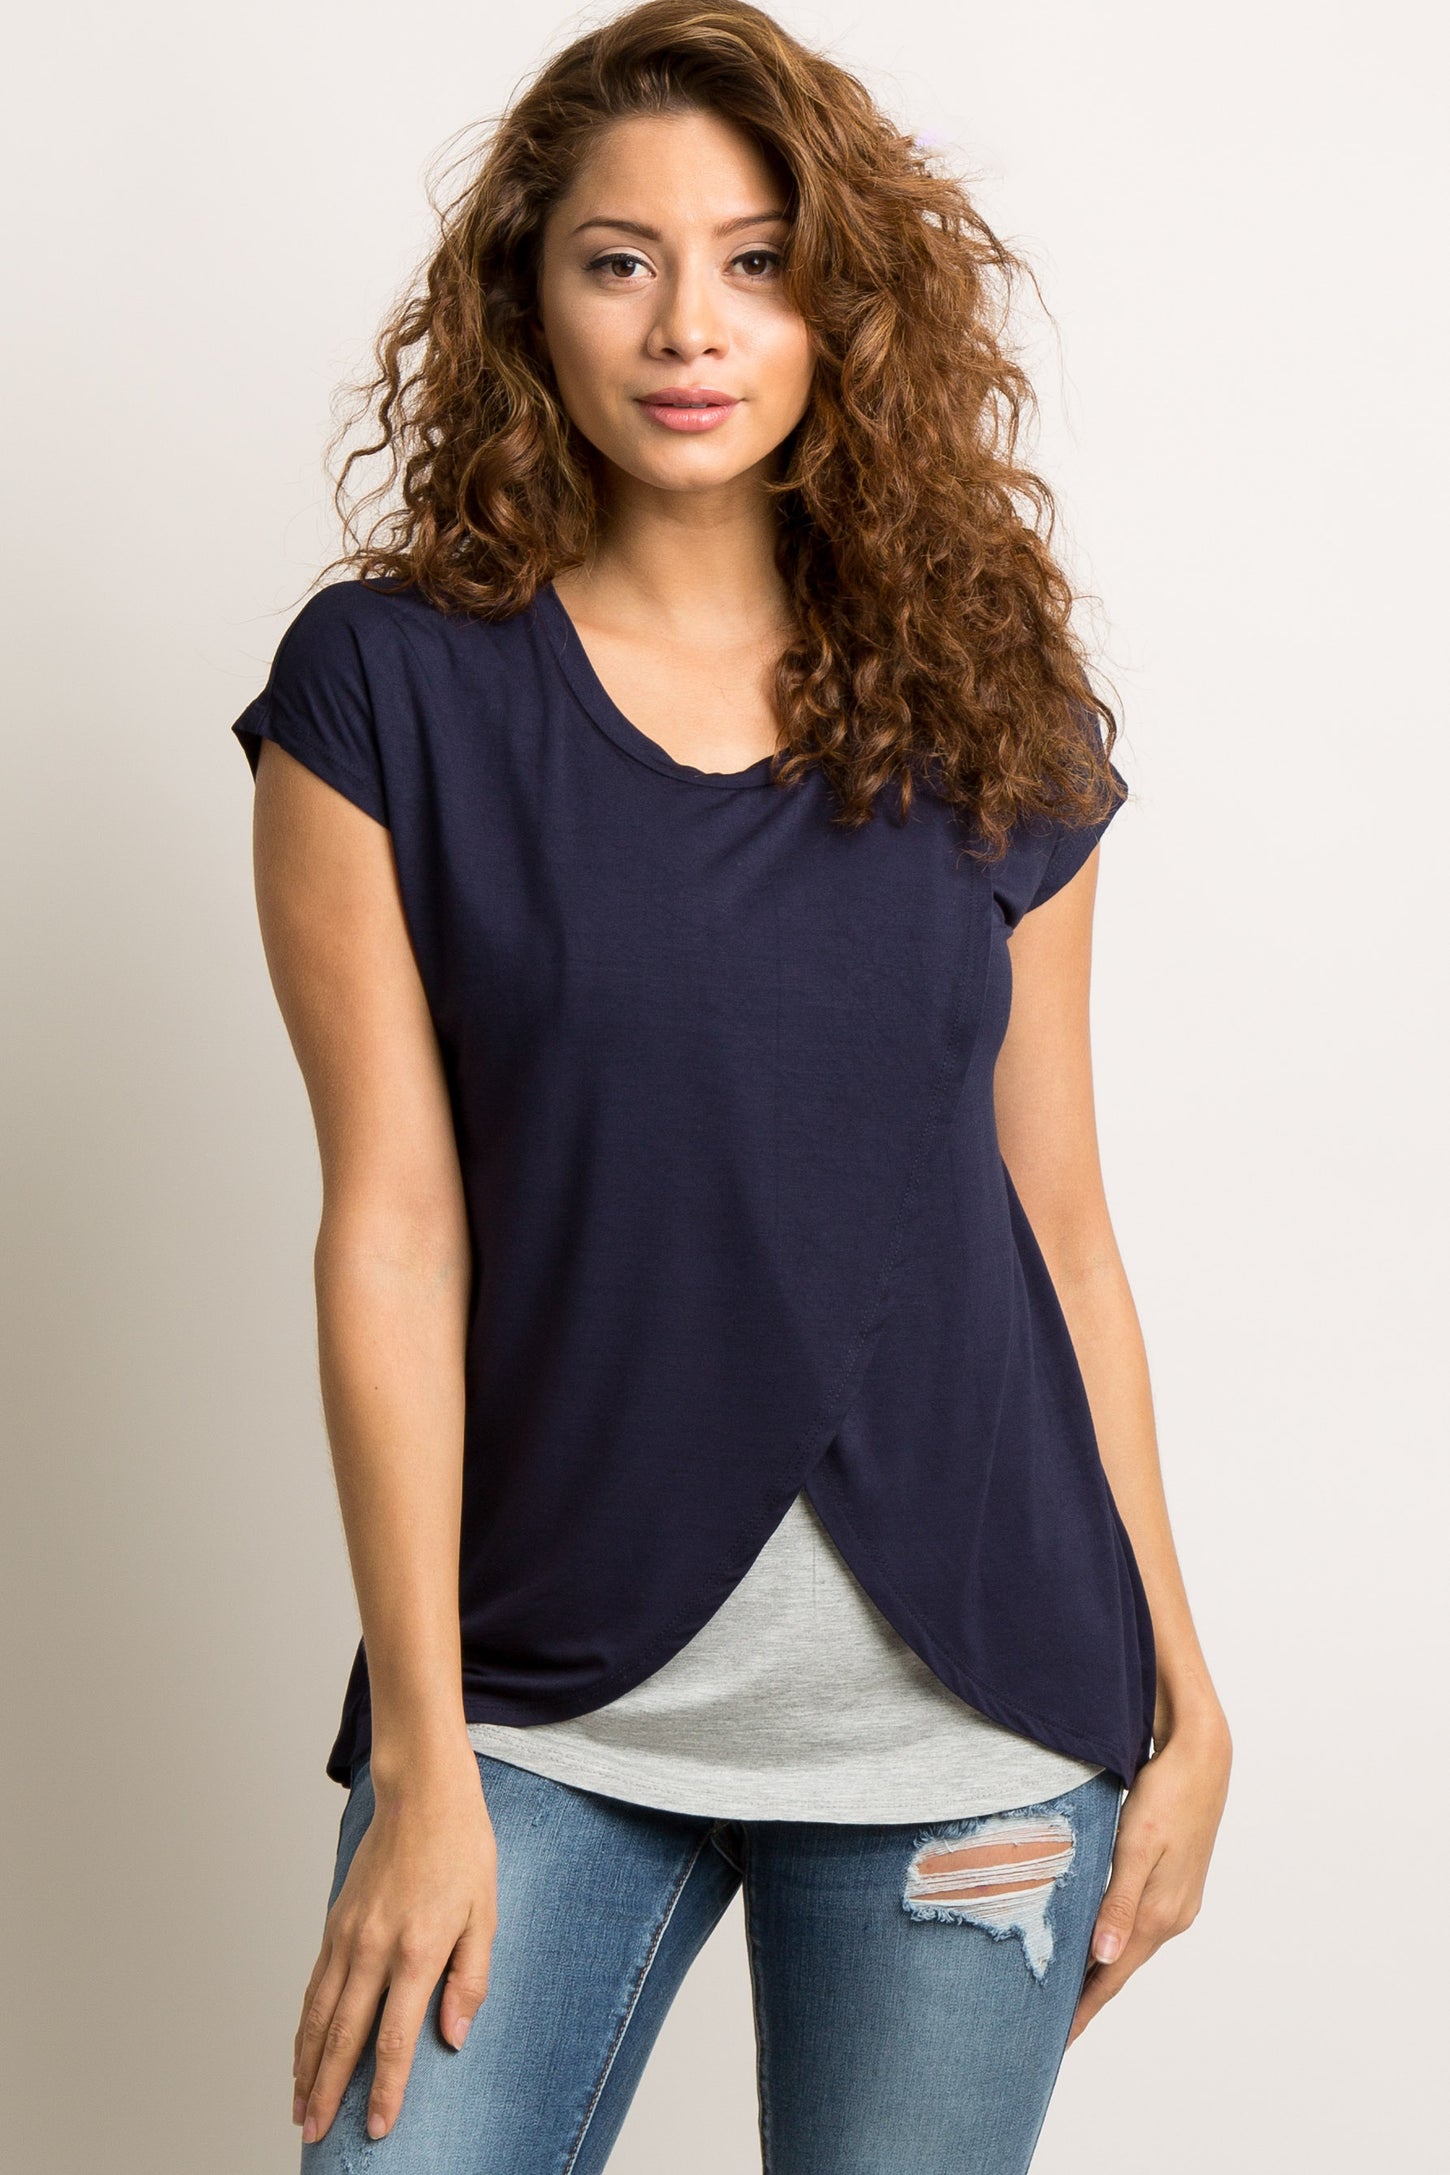 Navy Blue Layered Wrap Front Maternity/Nursing Top